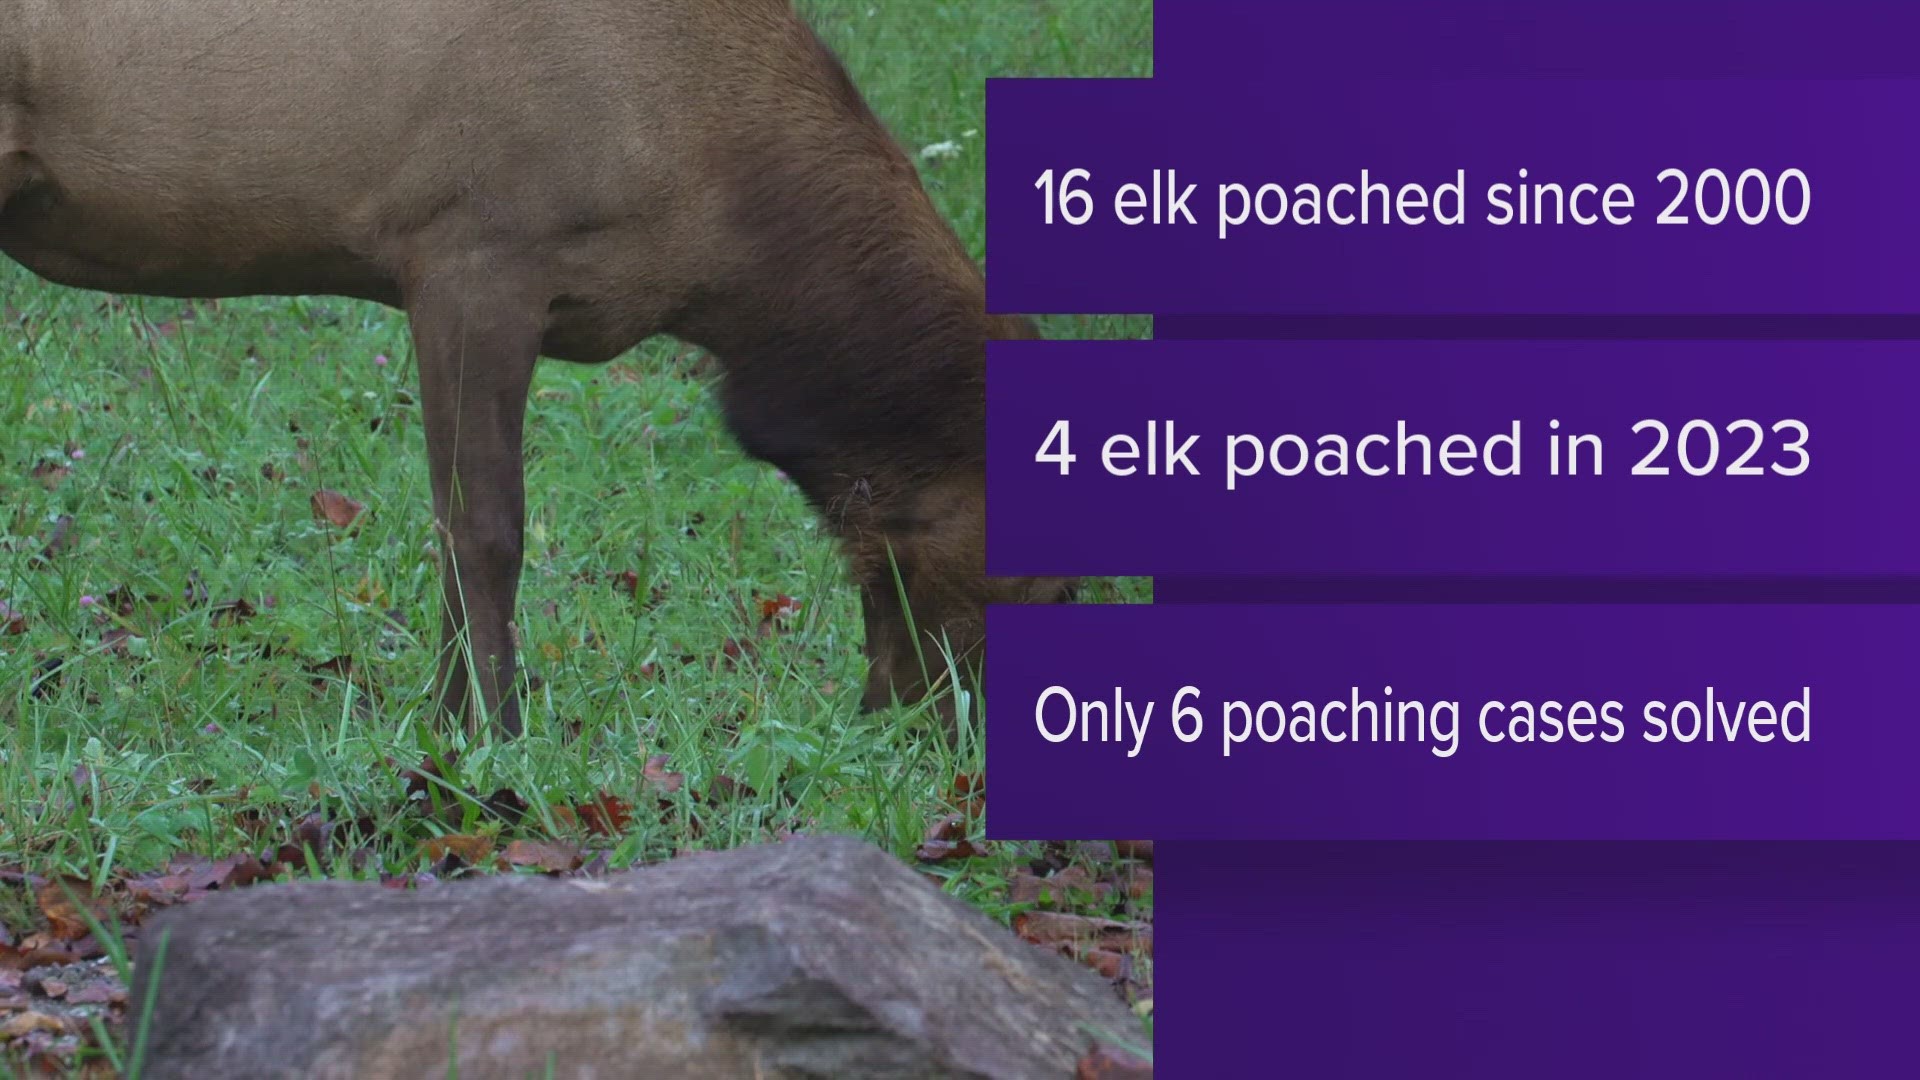 The Tennessee Wildlife Resources Agency said only six poaching cases have ever been solved, and said it's important people share tips about poaching cases.